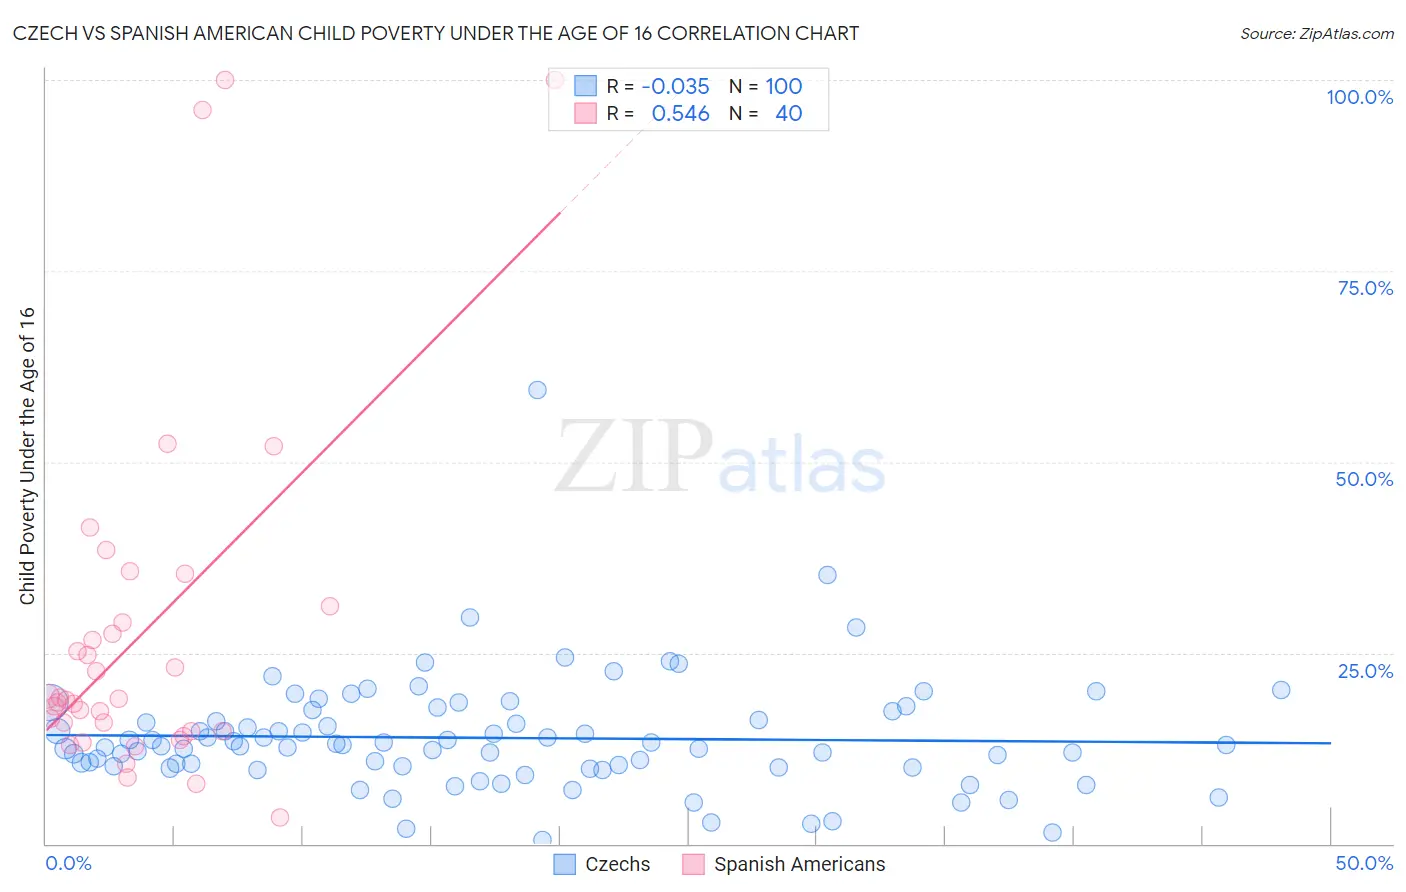 Czech vs Spanish American Child Poverty Under the Age of 16